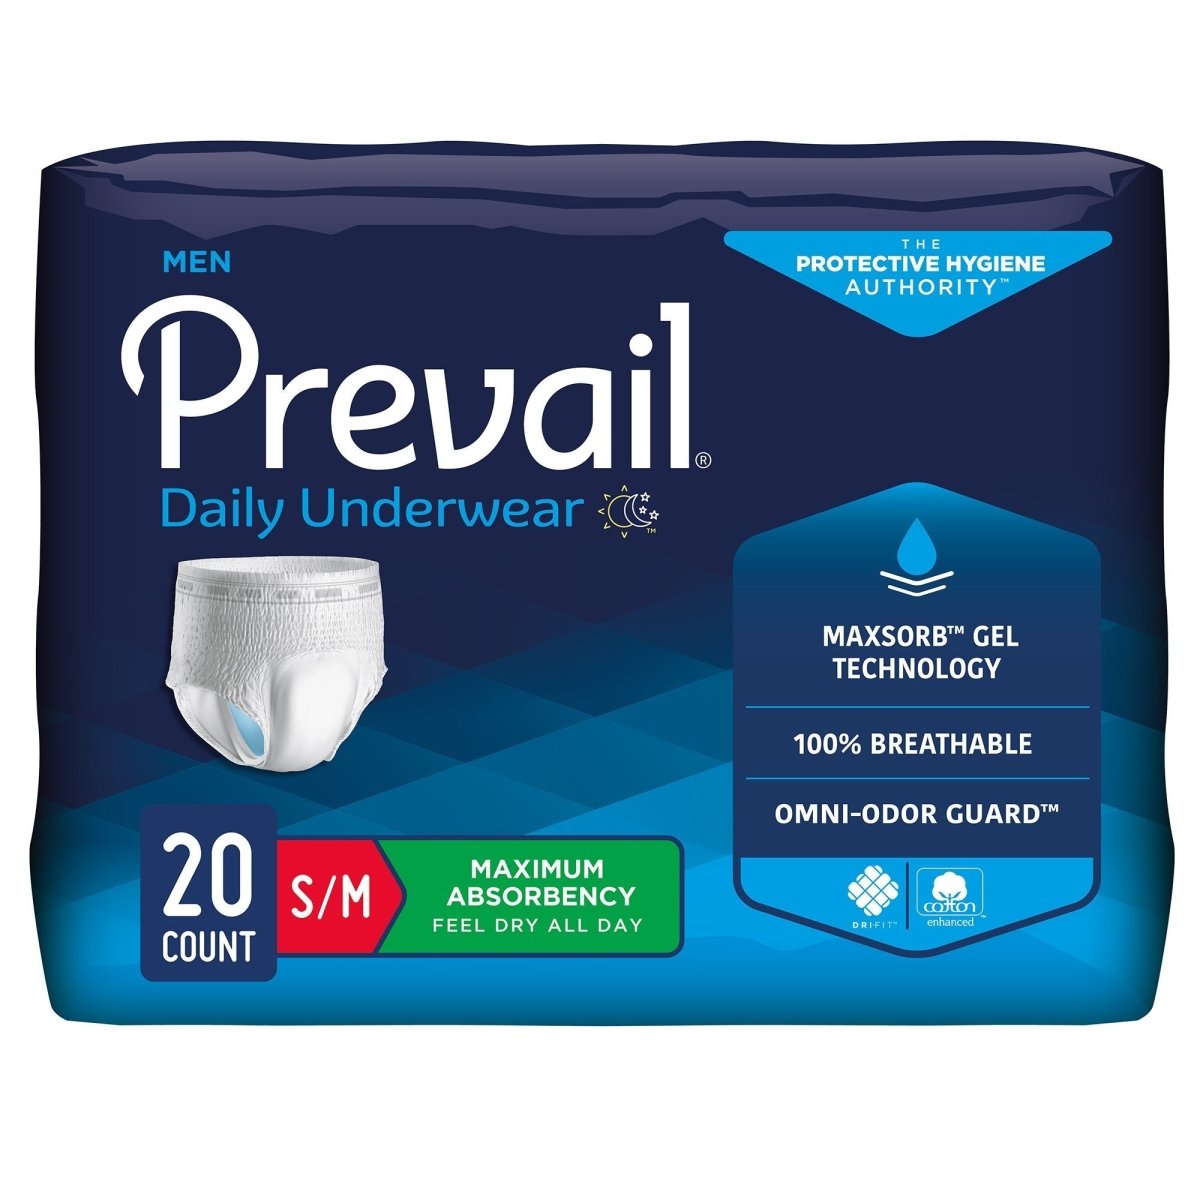 Adult Diapers for Men - Incontinence Protection Solutions